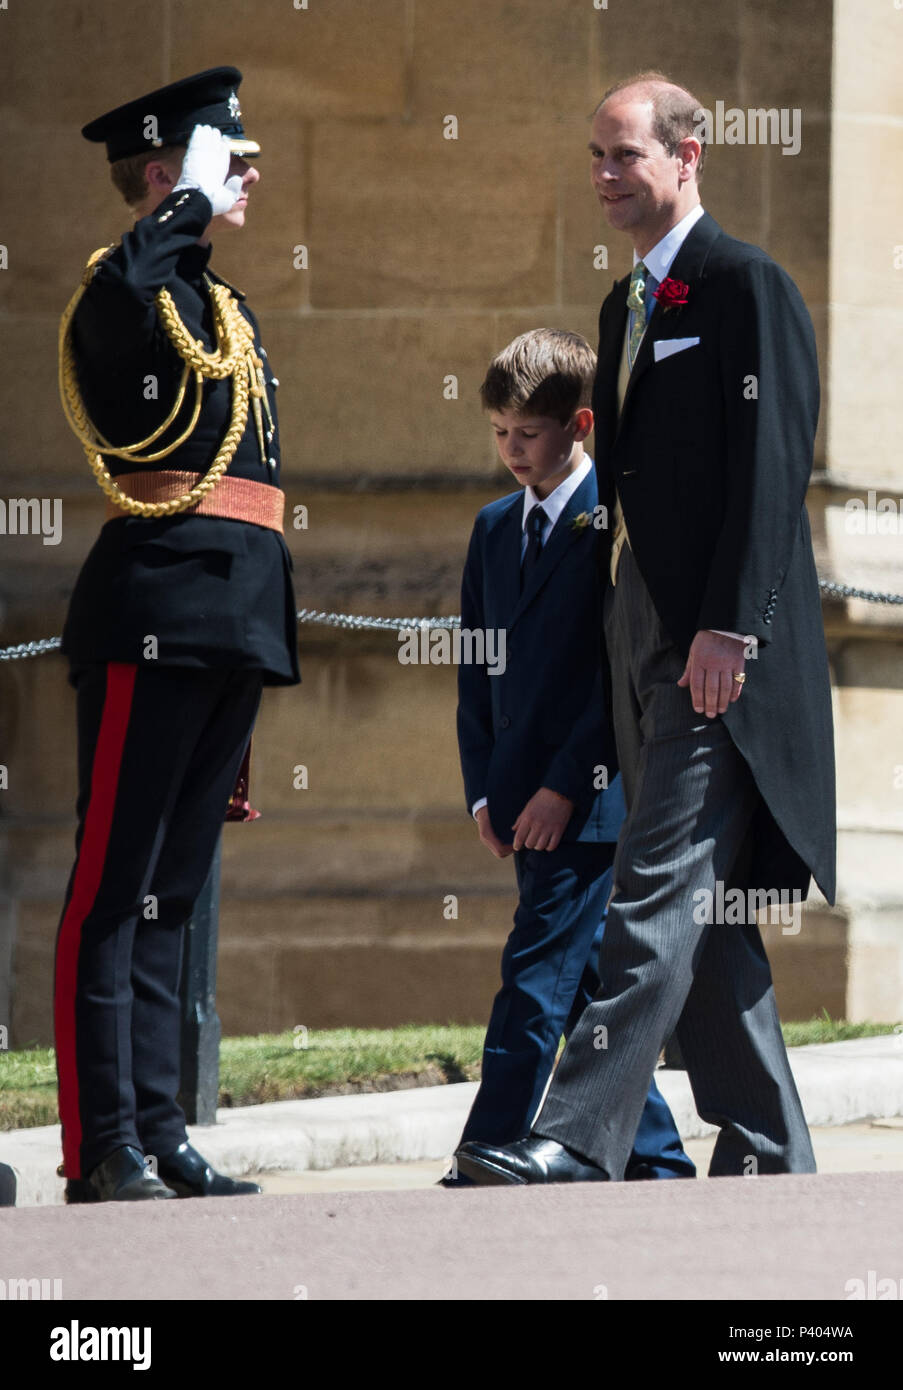 The wedding of Prince Harry and Meghan Markle at Windsor Castle  Featuring: Prince Edward, James Viscount Severn Where: Windsor, United Kingdom When: 19 May 2018 Credit: John Rainford/WENN Stock Photo